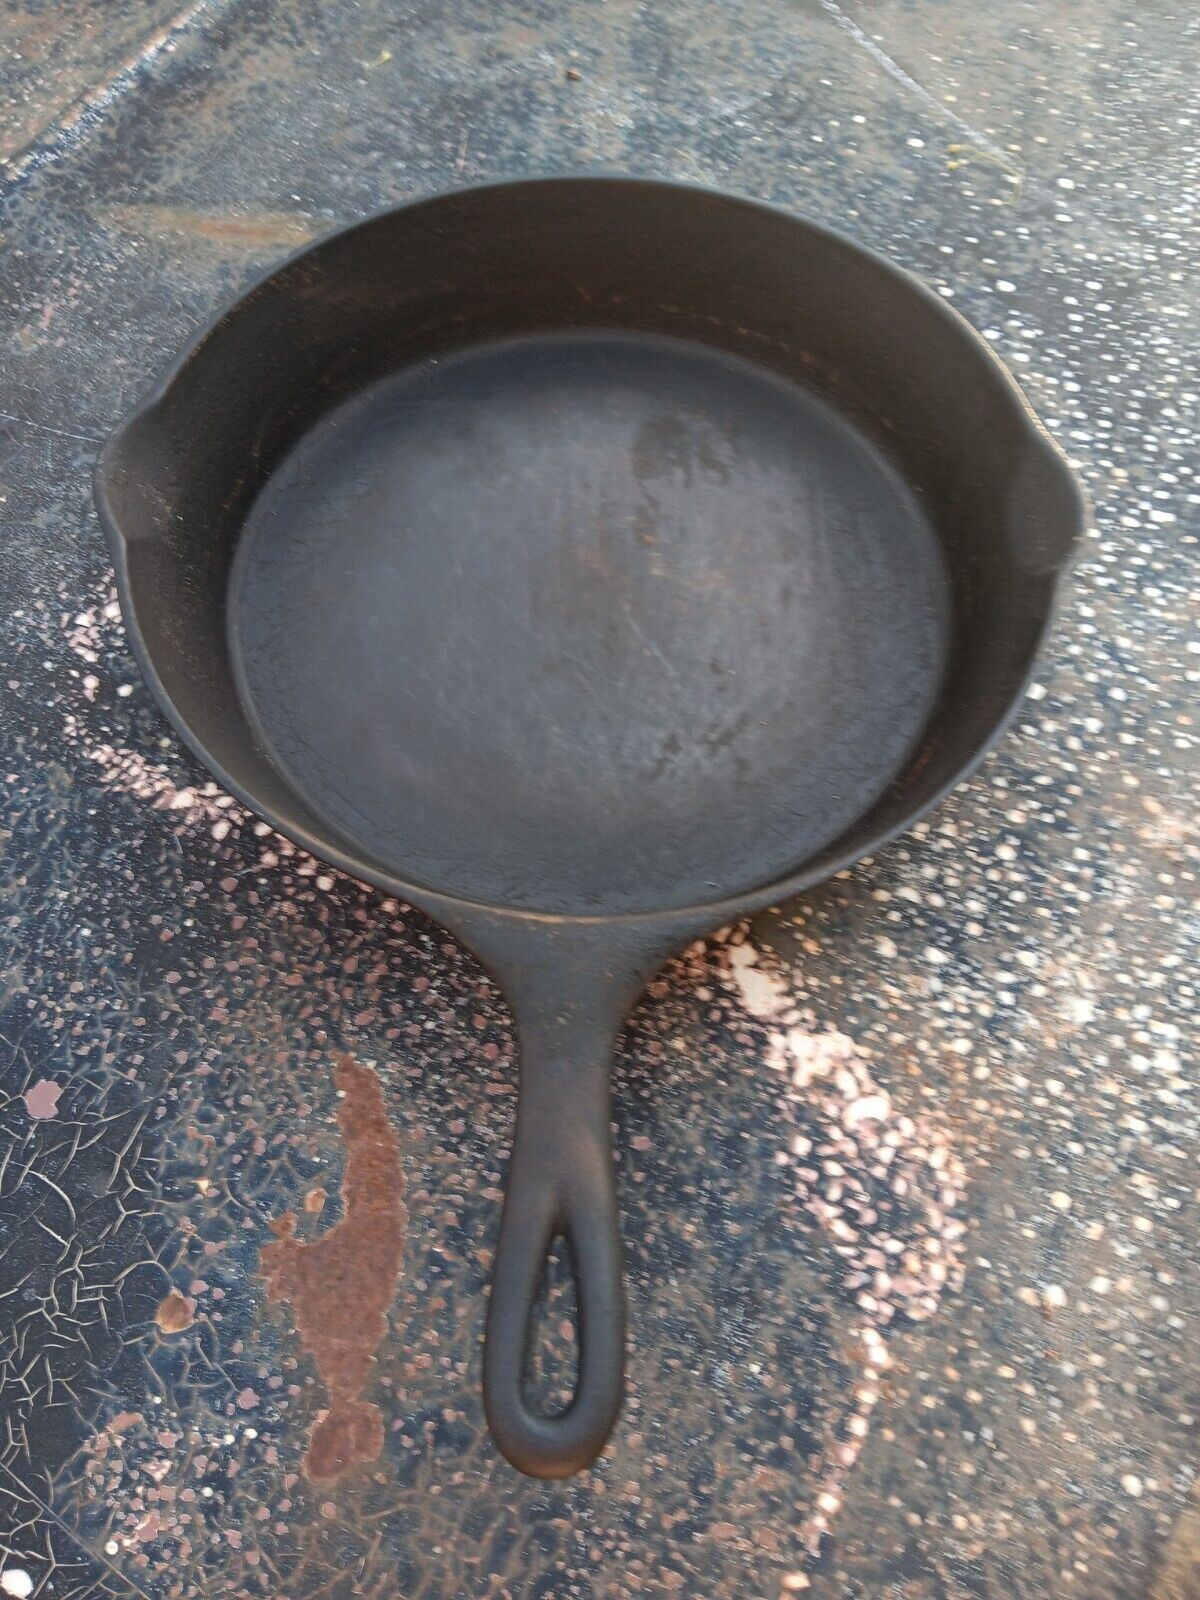 WAGNER Sidney 0 No.9 Cast Iron Skillet with Heat Ring